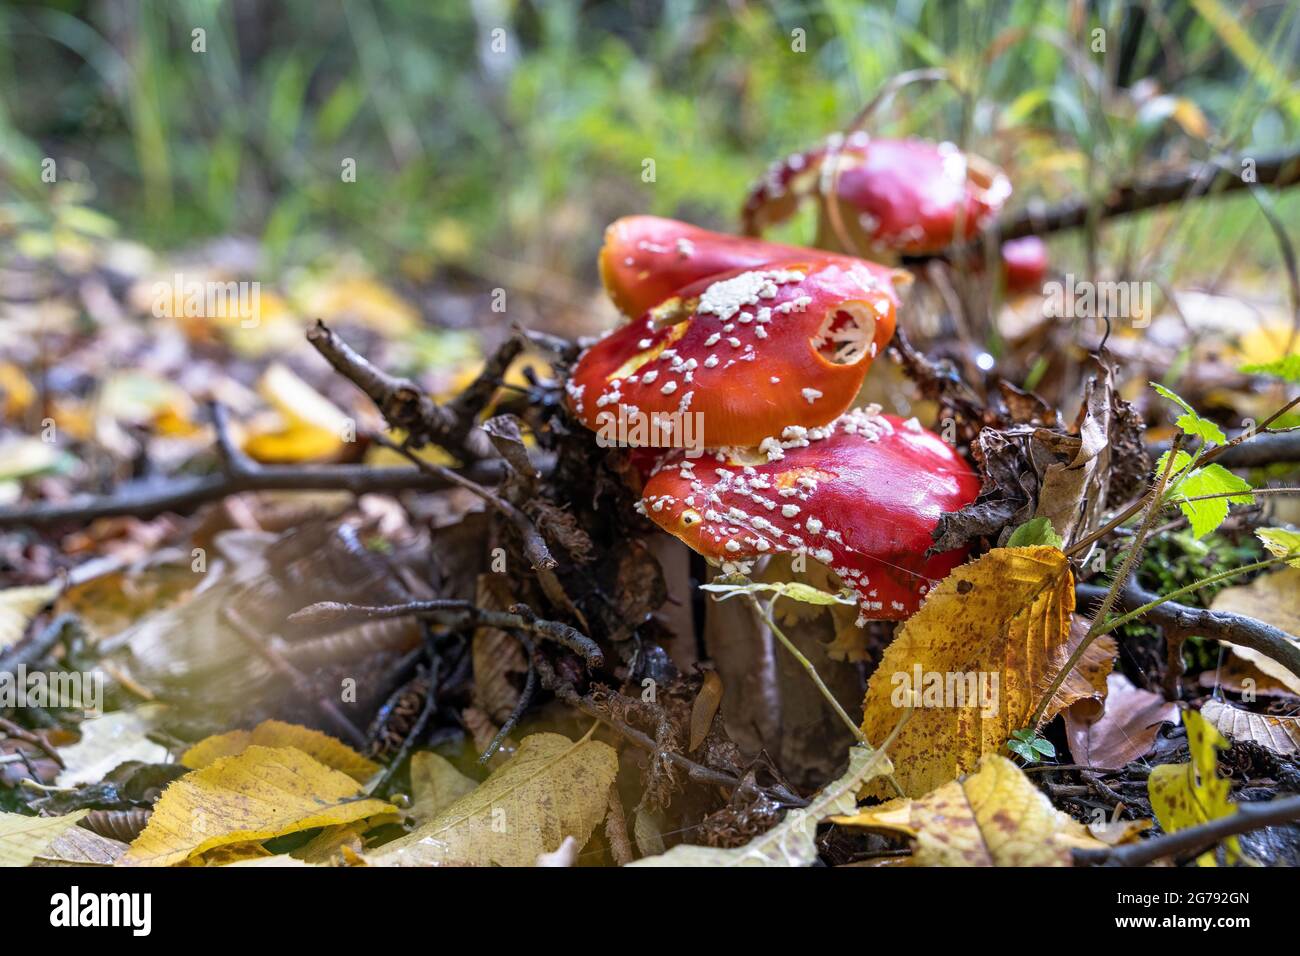 Europe, Germany, Baden-Wuerttemberg, Stuttgart, Damaged toadstools in the autumn forest Stock Photo